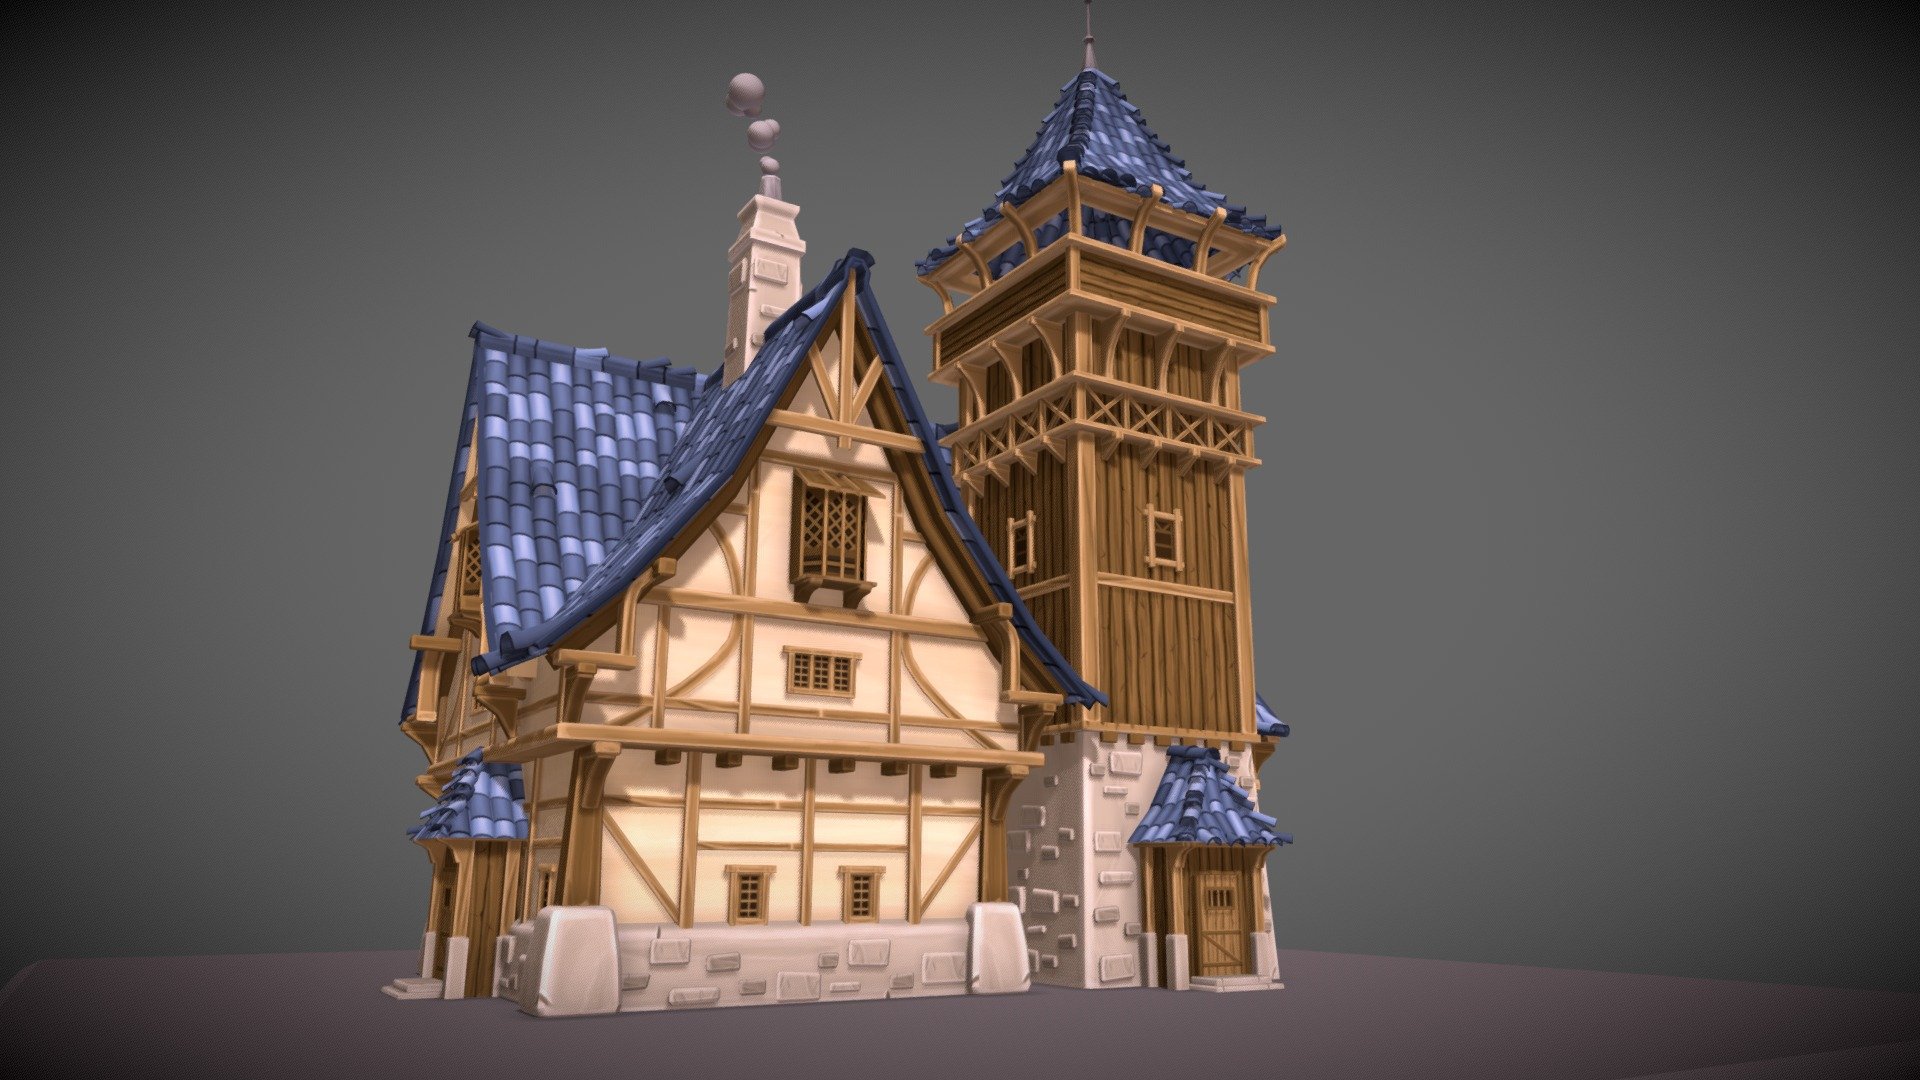 Modelled a house from a concept created by hahi YU, You can find his concept at https://www.artstation.com/artwork/KQz0x.

All textures hand painted. Model created in 3Ds Max and textures created using Photoshop 3d model